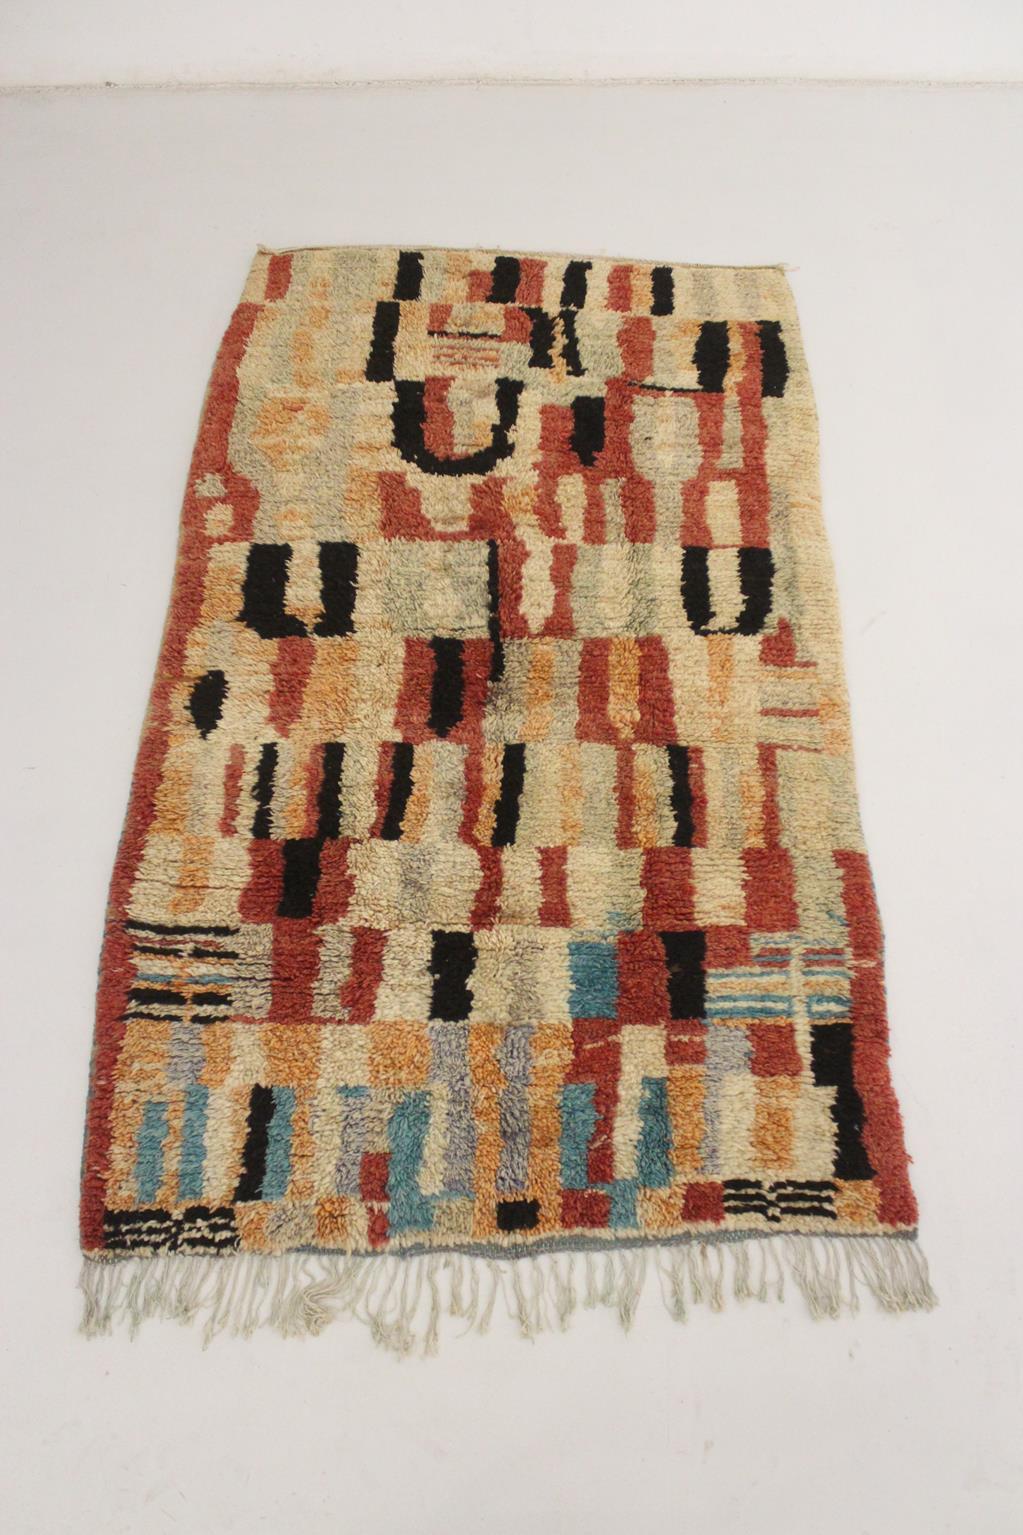 Here is one of the lovely Boujad rugs with abstract designs I fell in love with! The main colors are a terracotta mixed with black, beige, faded gray and orange and a few touches of bright blue close to the tassels ending that make all the